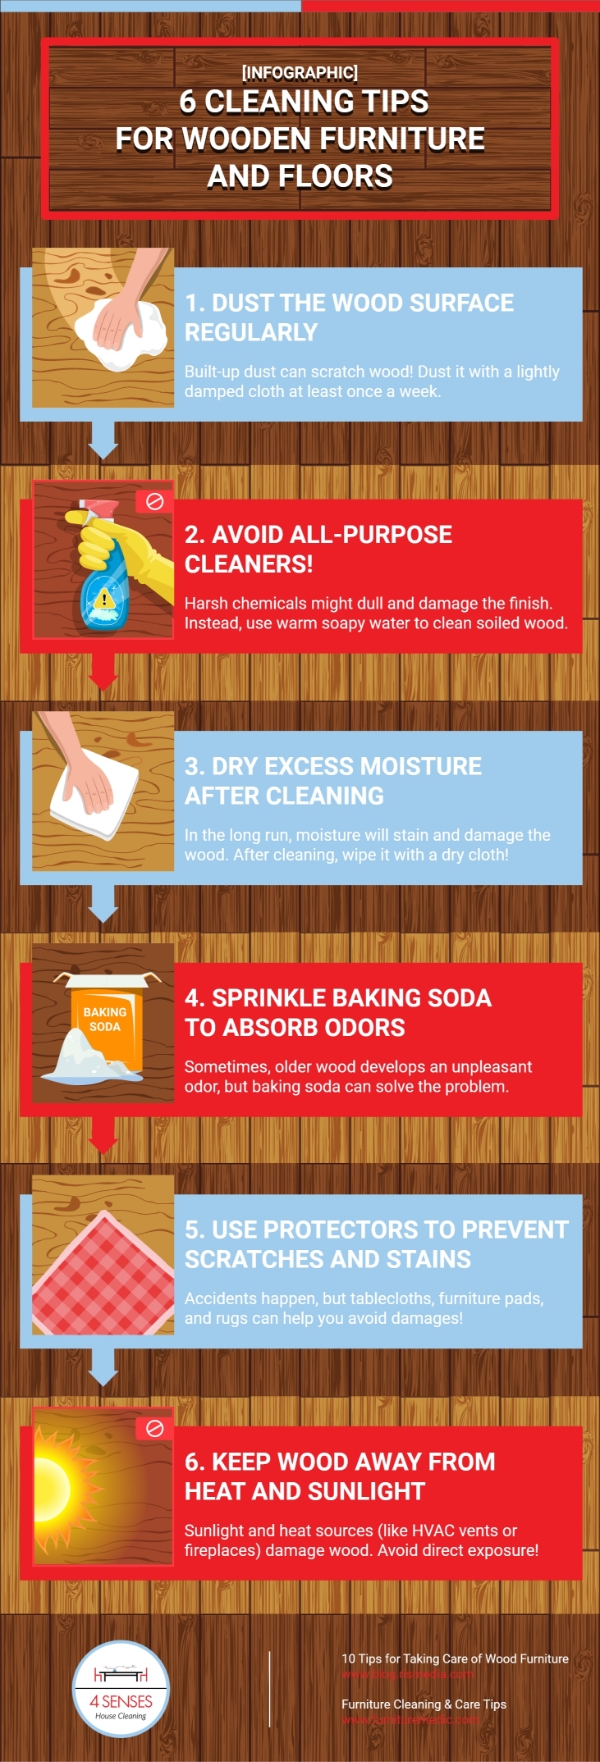 4 Senses House Cleaning - [Infographic] 6 Cleaning Tips For Wooden Furniture And Floors